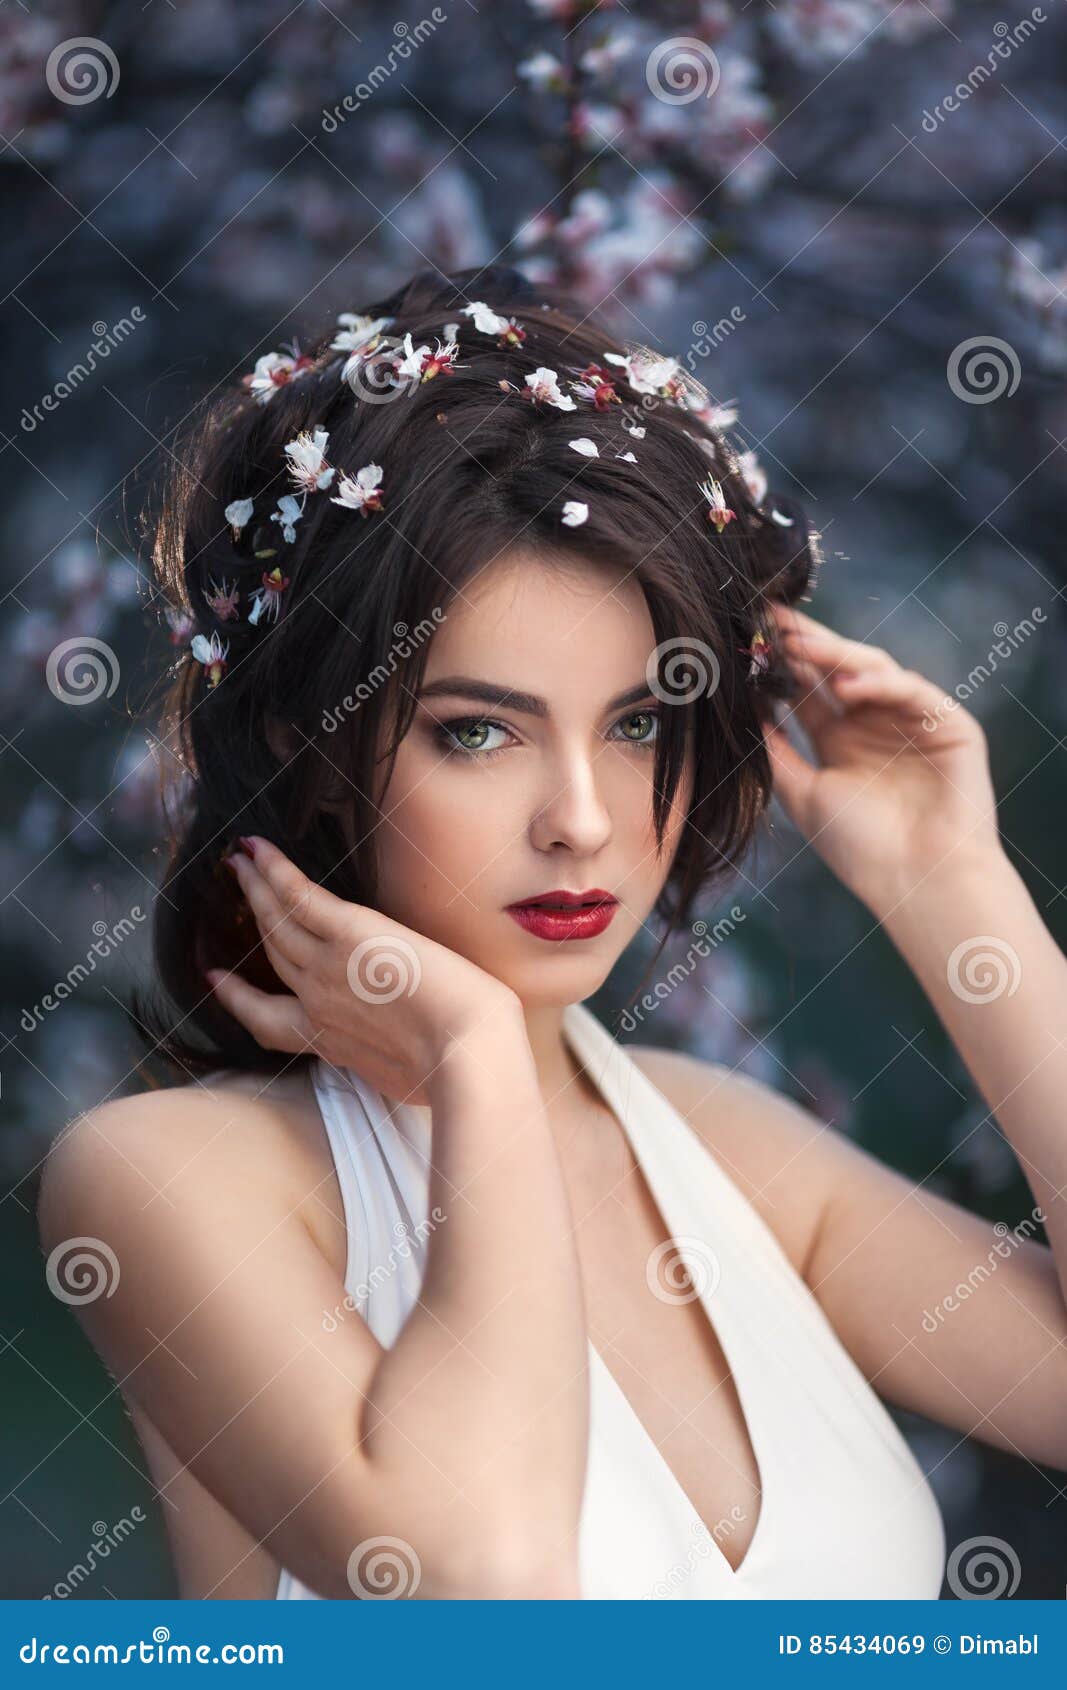 Beautiful Girl Standing At Blossoming Tree In The Garden Stock Image